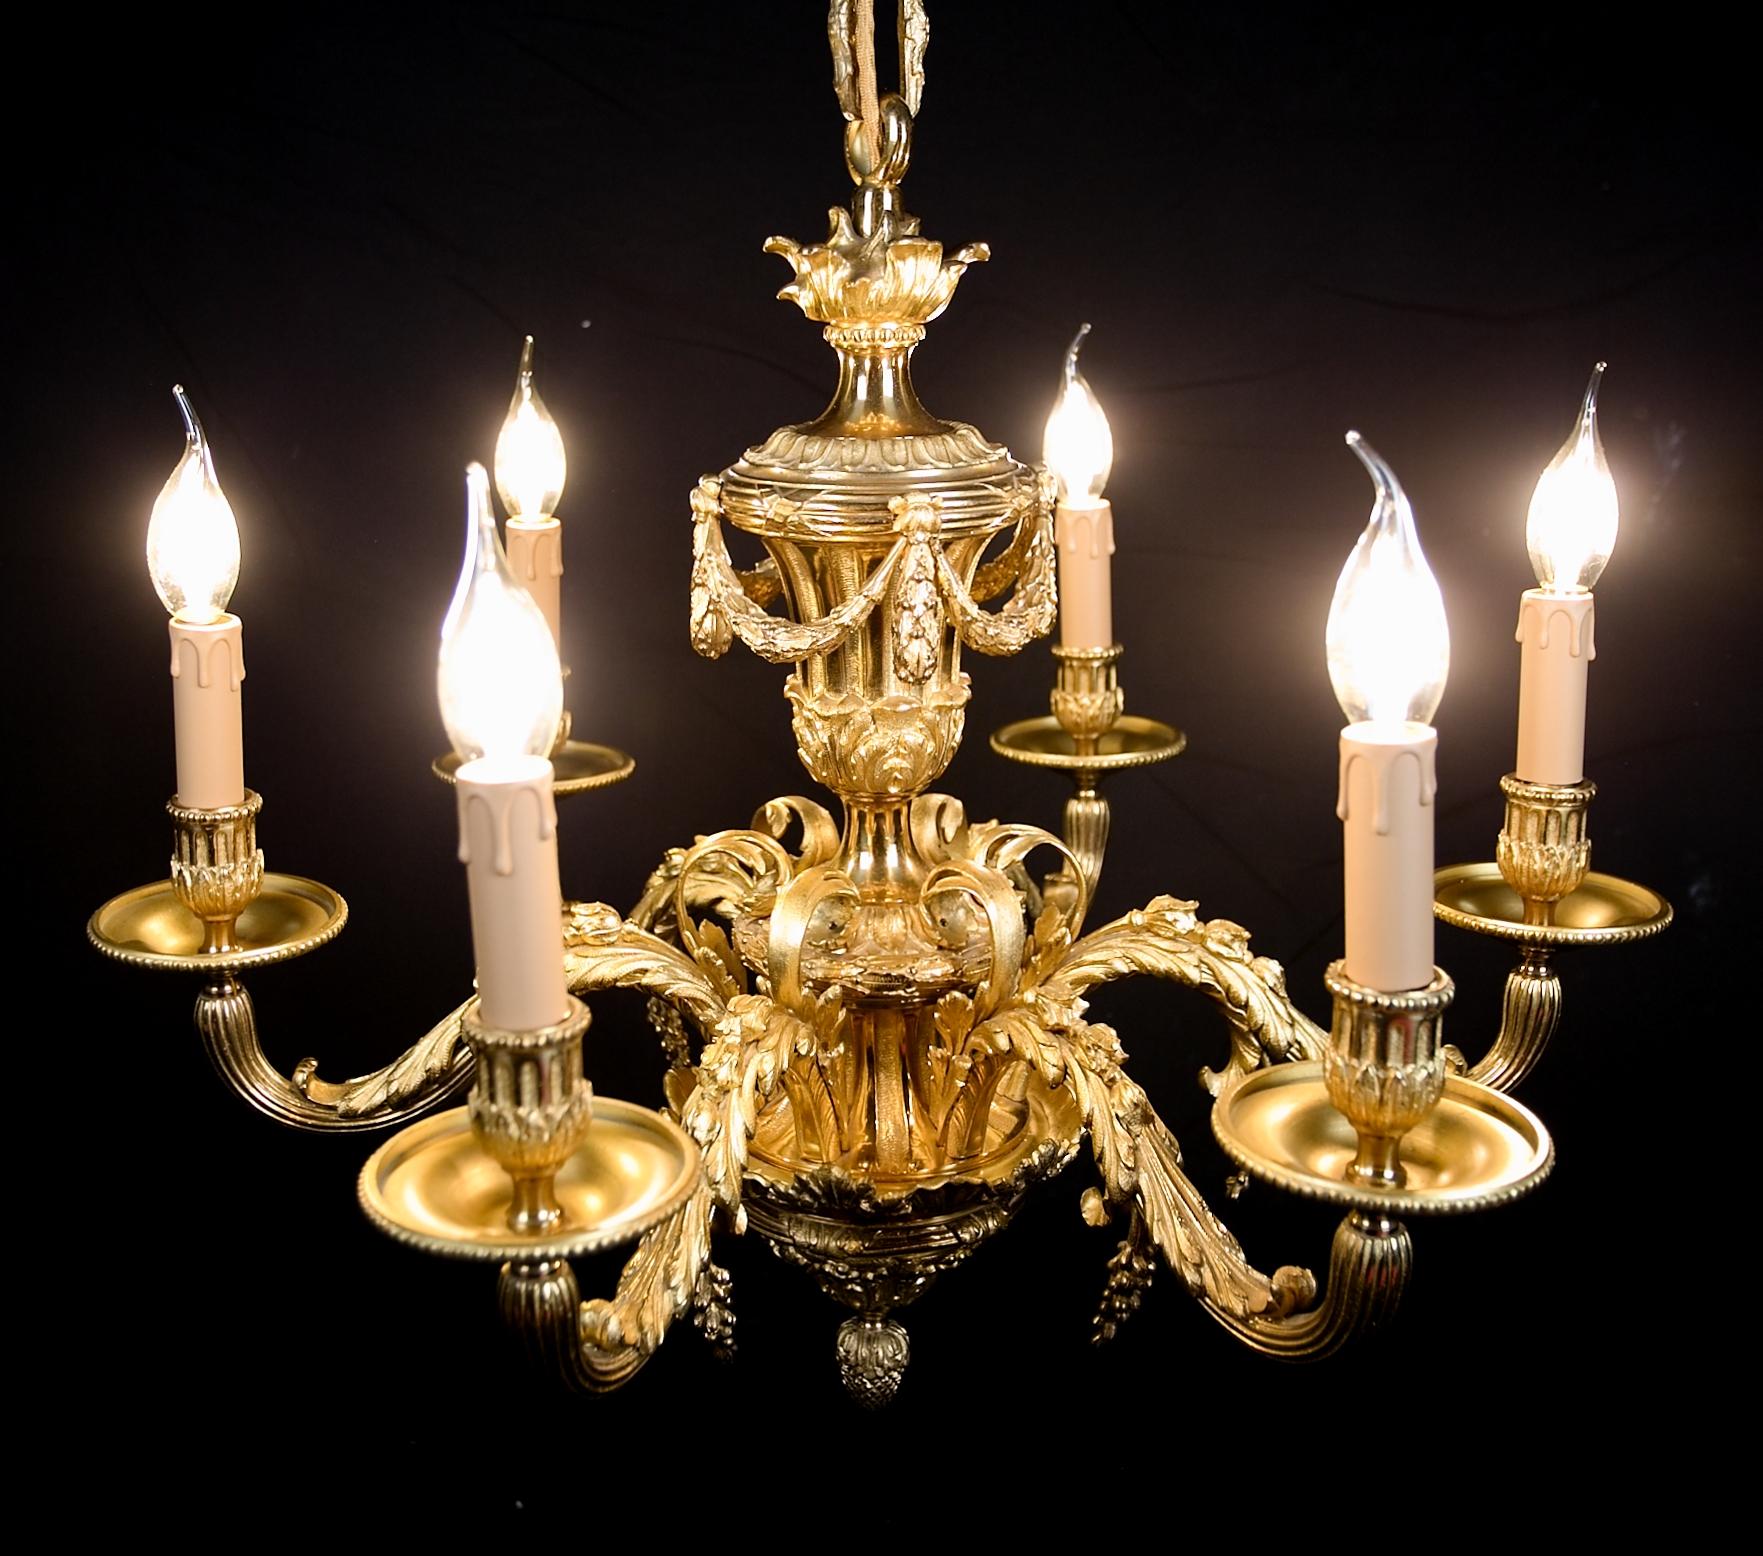 Antique Mazarin gilt bronze chandelier

Six-arm luxury chandelier made of gilded bronze after total restoration. - completely new electrical installation: new wiring, new sheaths and a new supply cable with fabric braiding in the old style, but